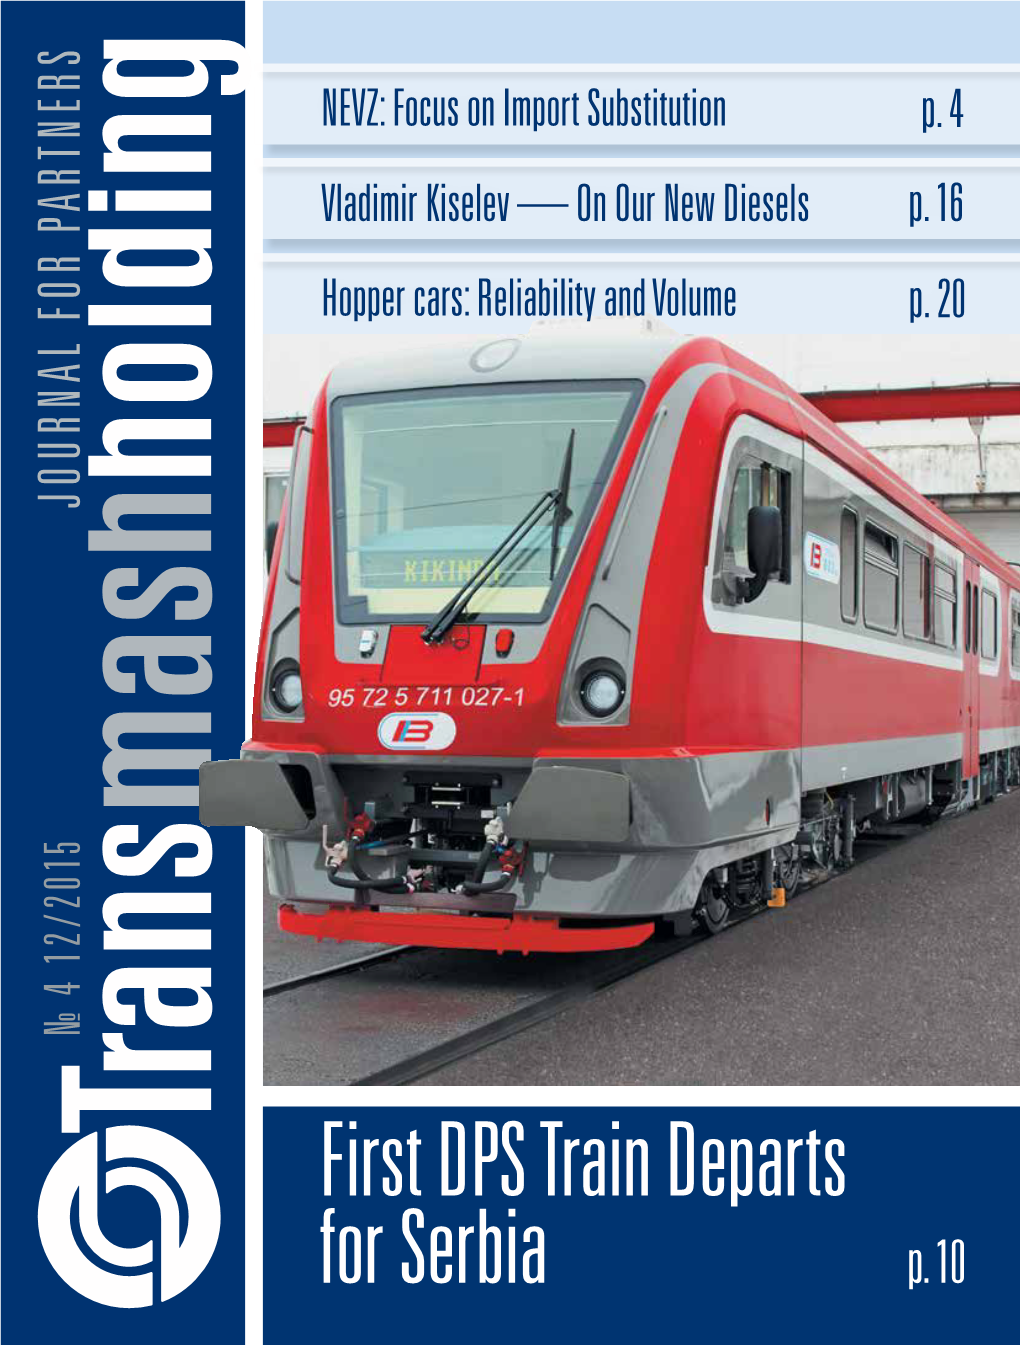 First DPS Train Departs for Serbia